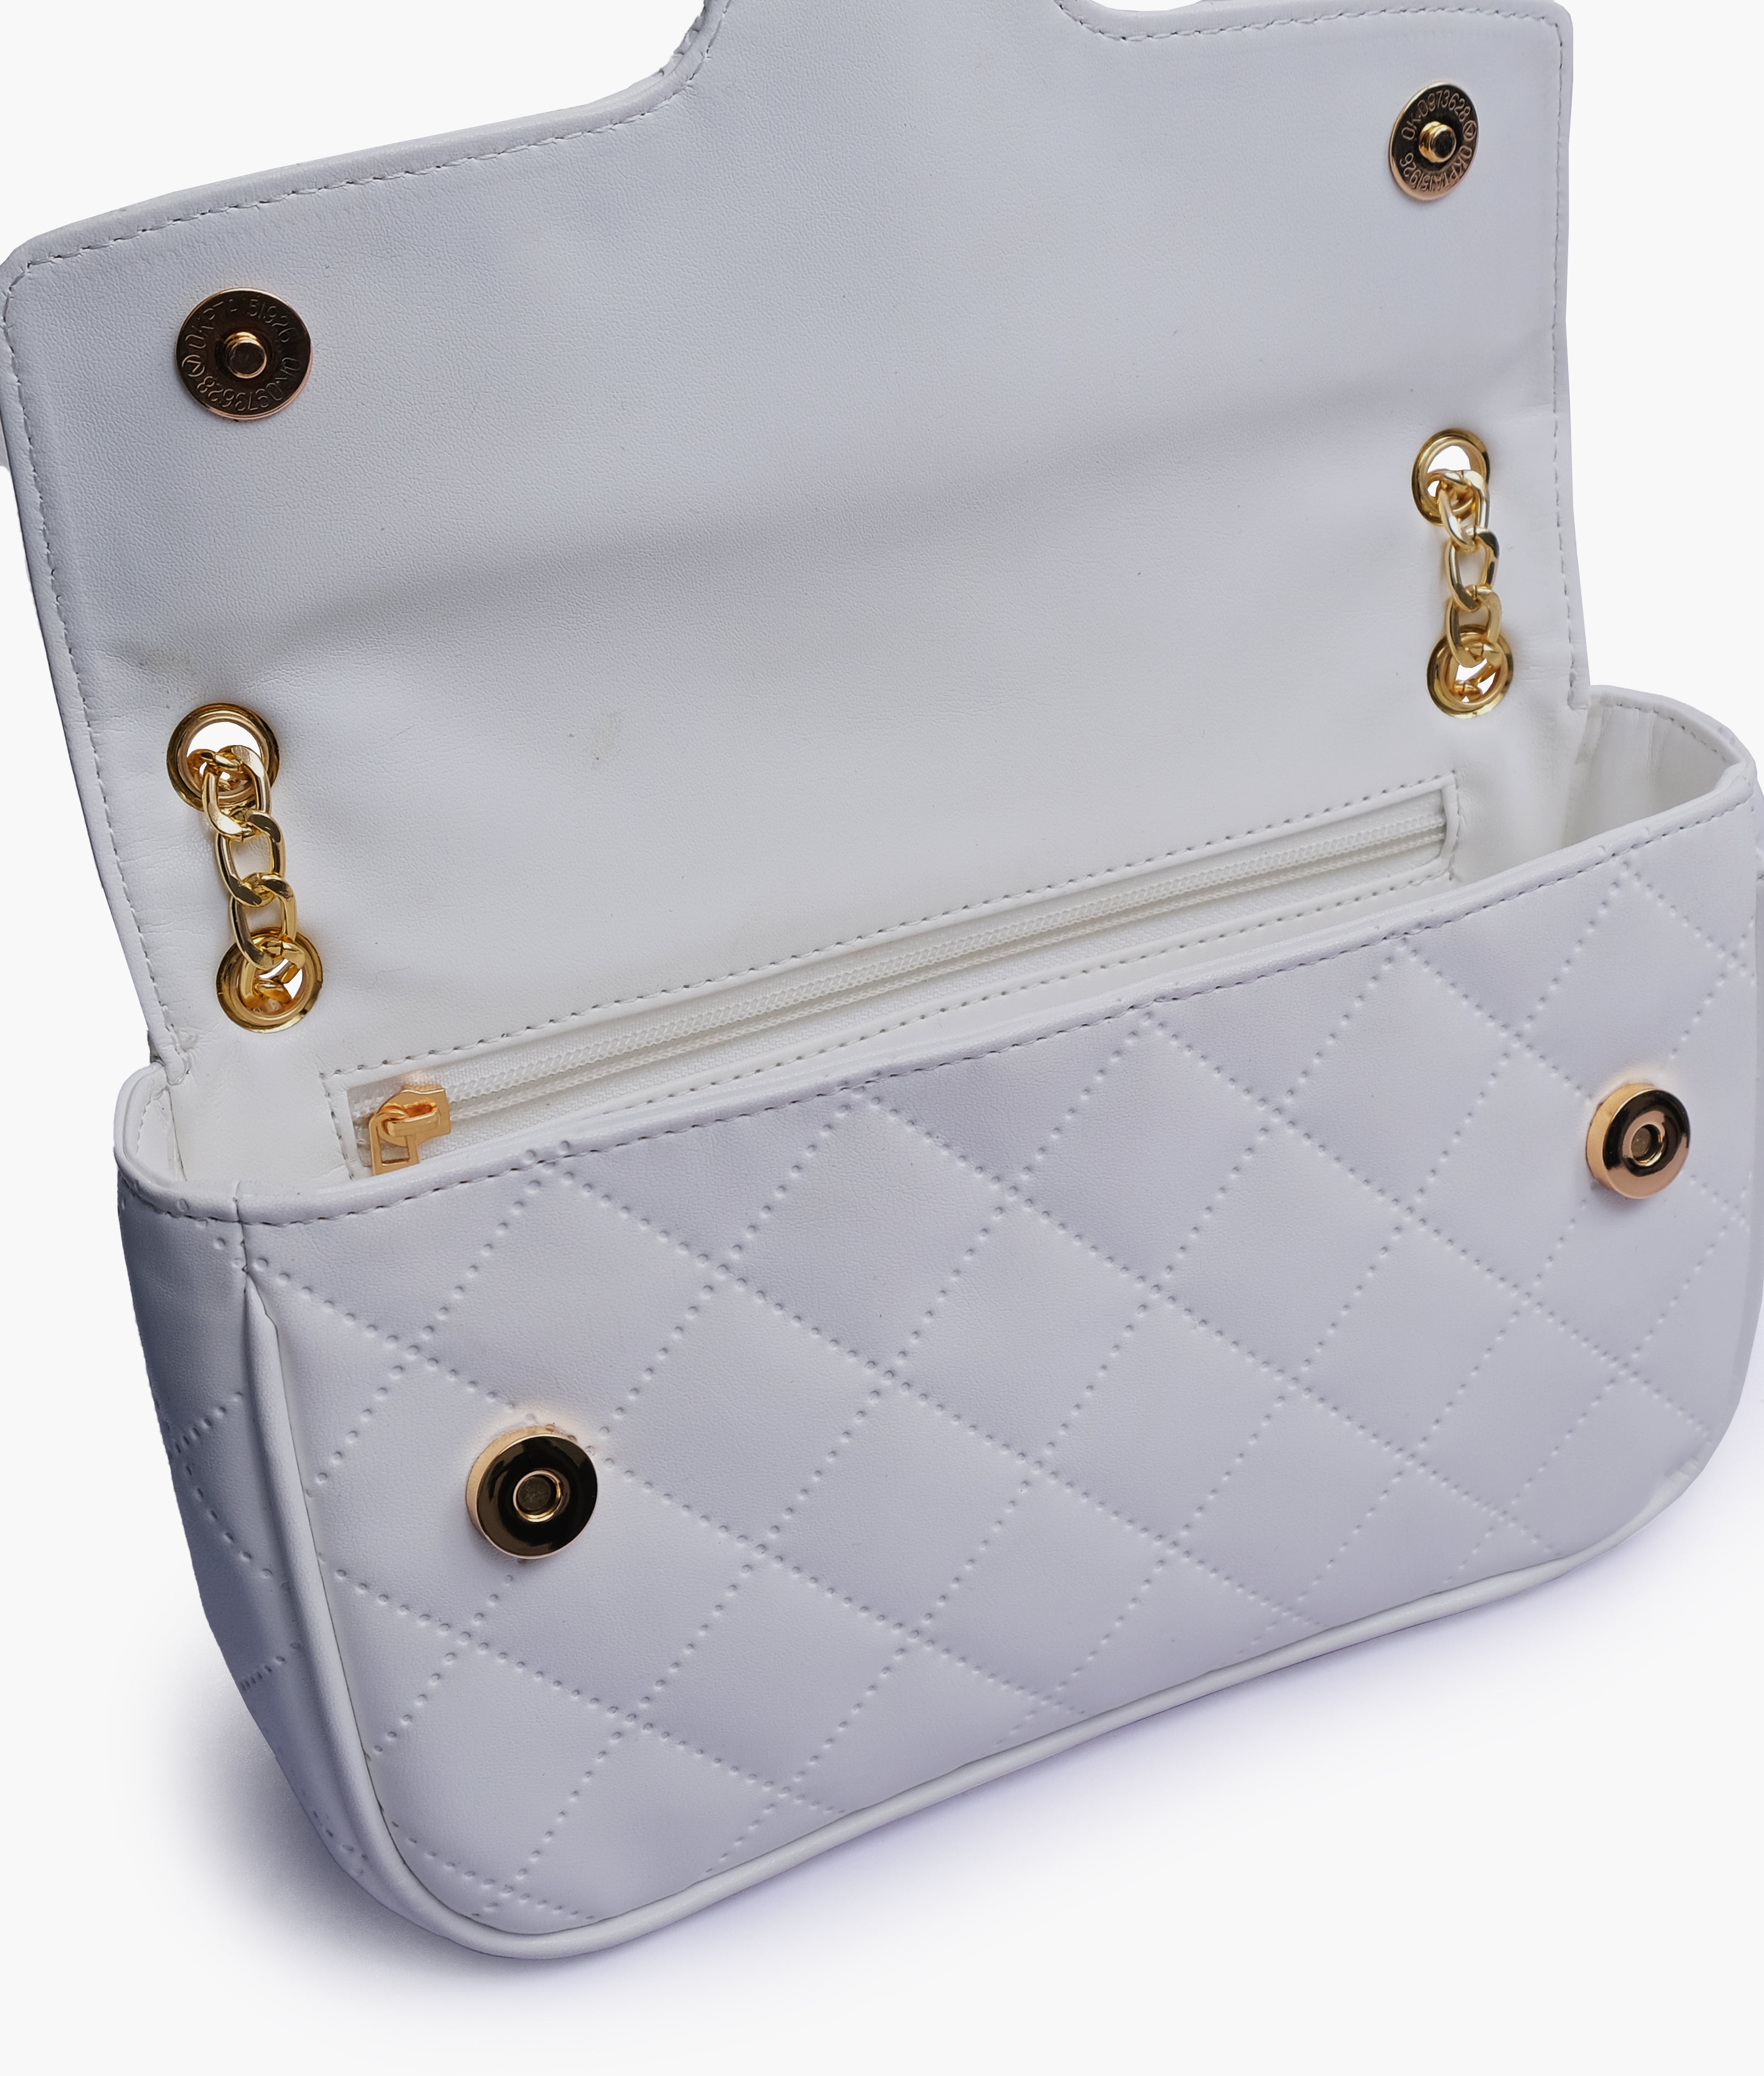 White quilted small shoulder bag with chain